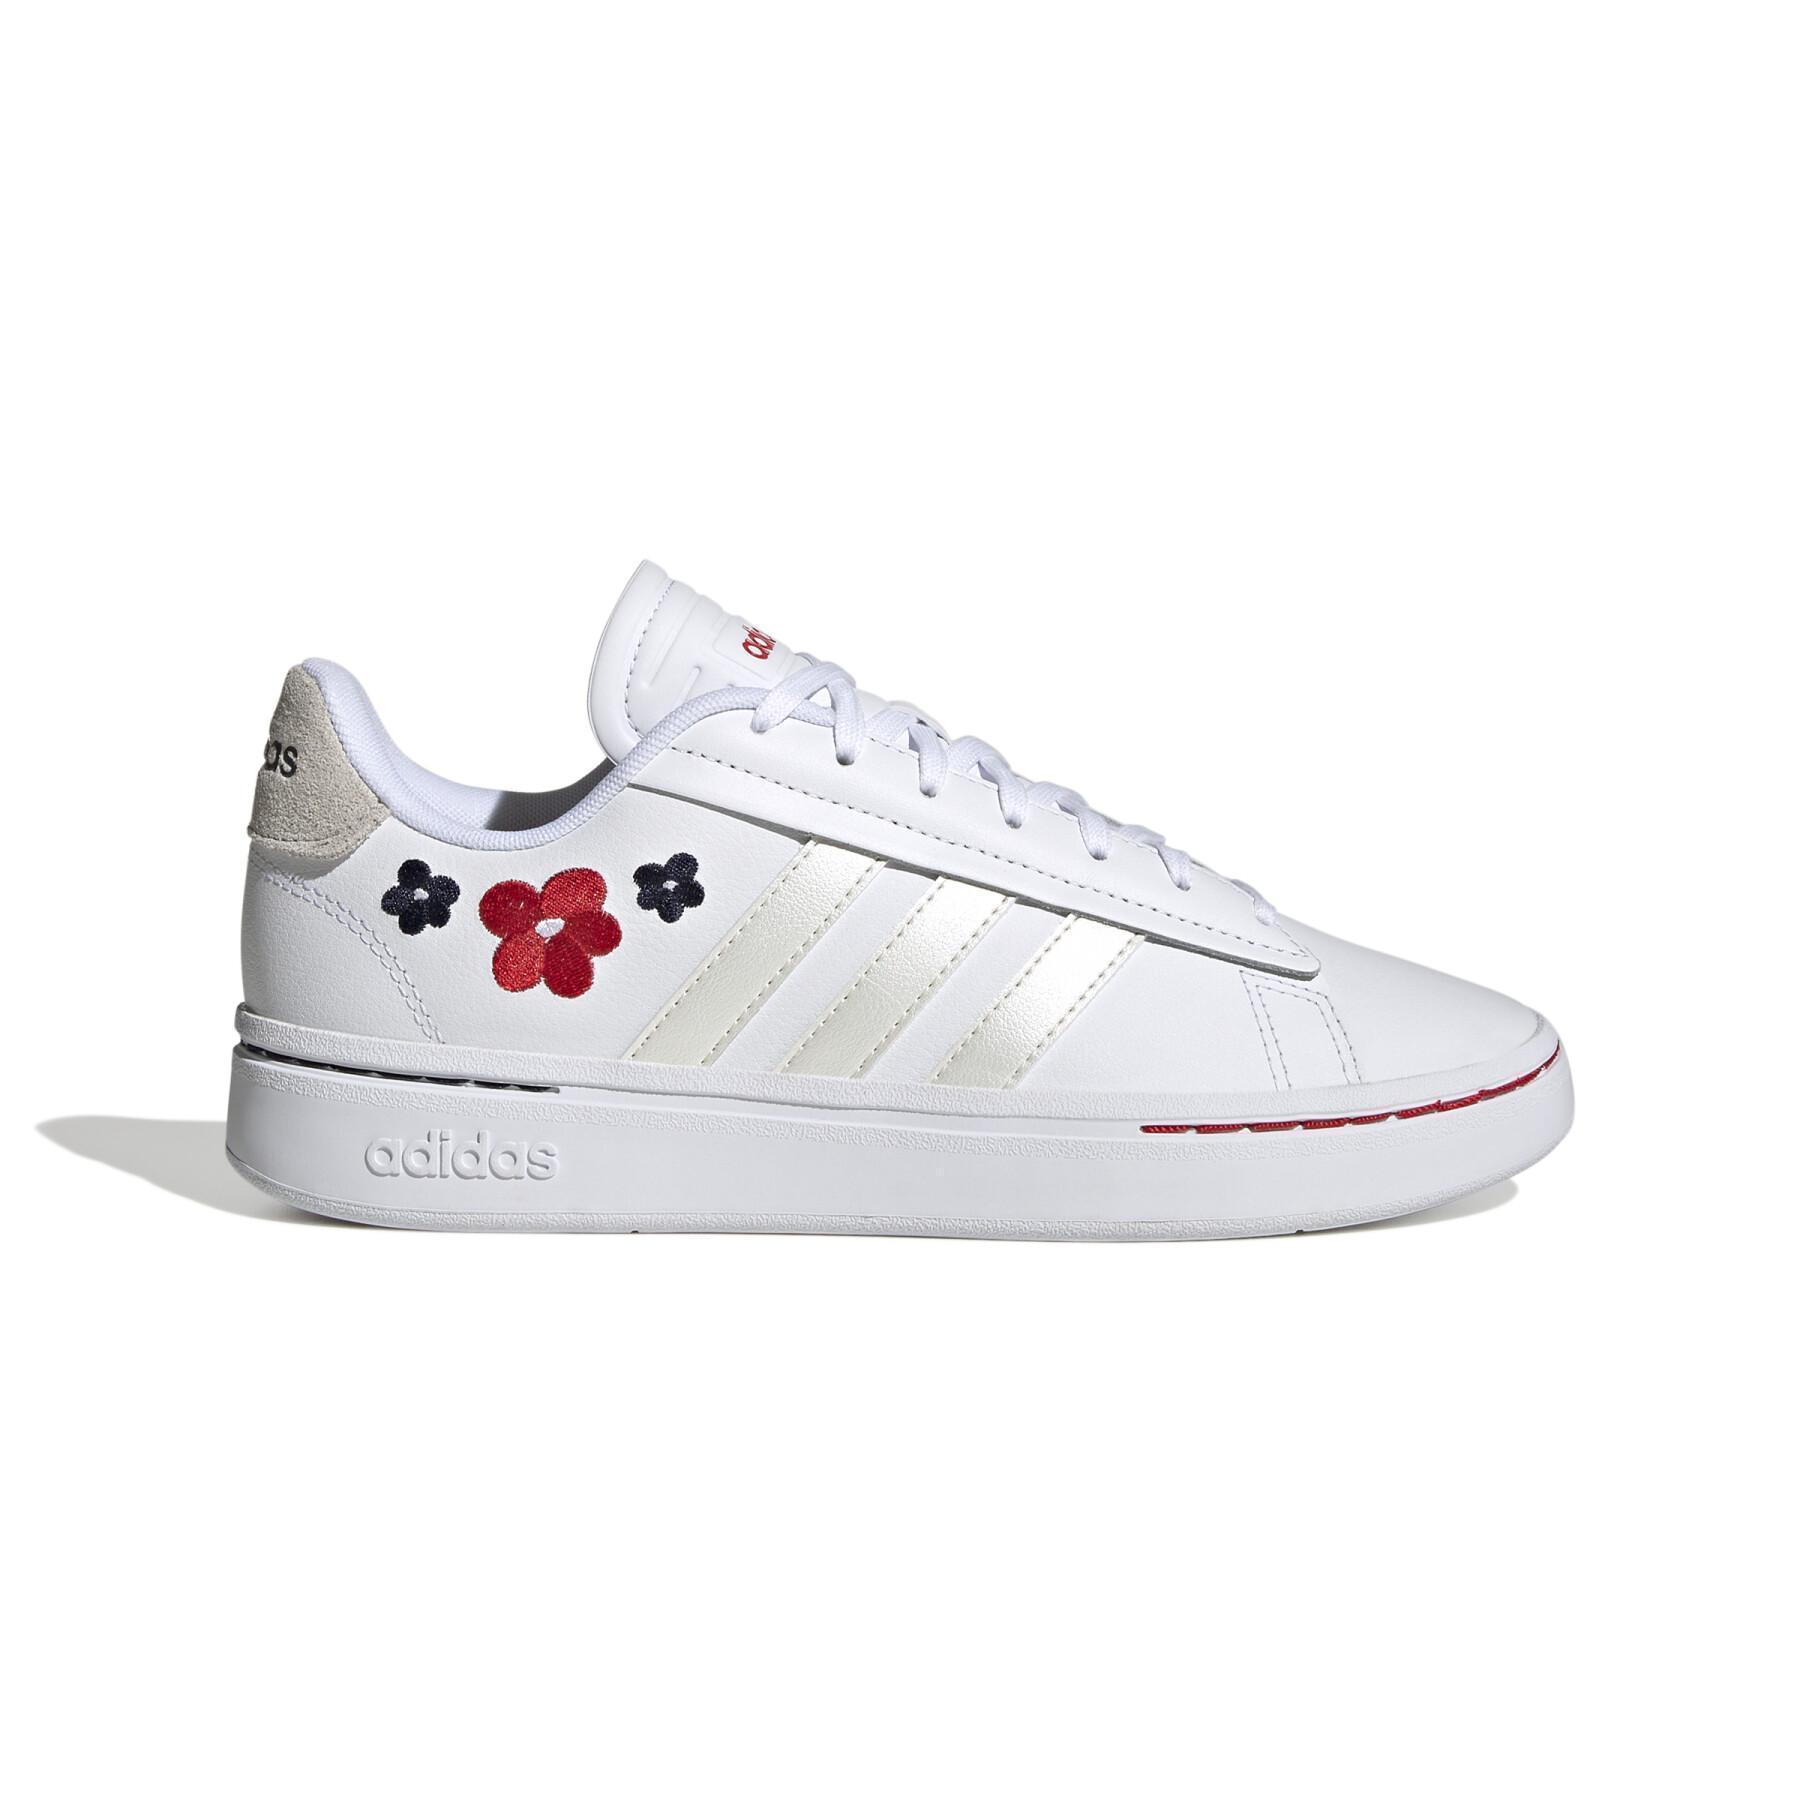 https://media.direct-volley.fr/catalog/product/cache/image/1800x/9df78eab33525d08d6e5fb8d27136e95/a/d/adidas_hq6599_1_footwear_photography_side_lateral_center_view_white_000.jpg